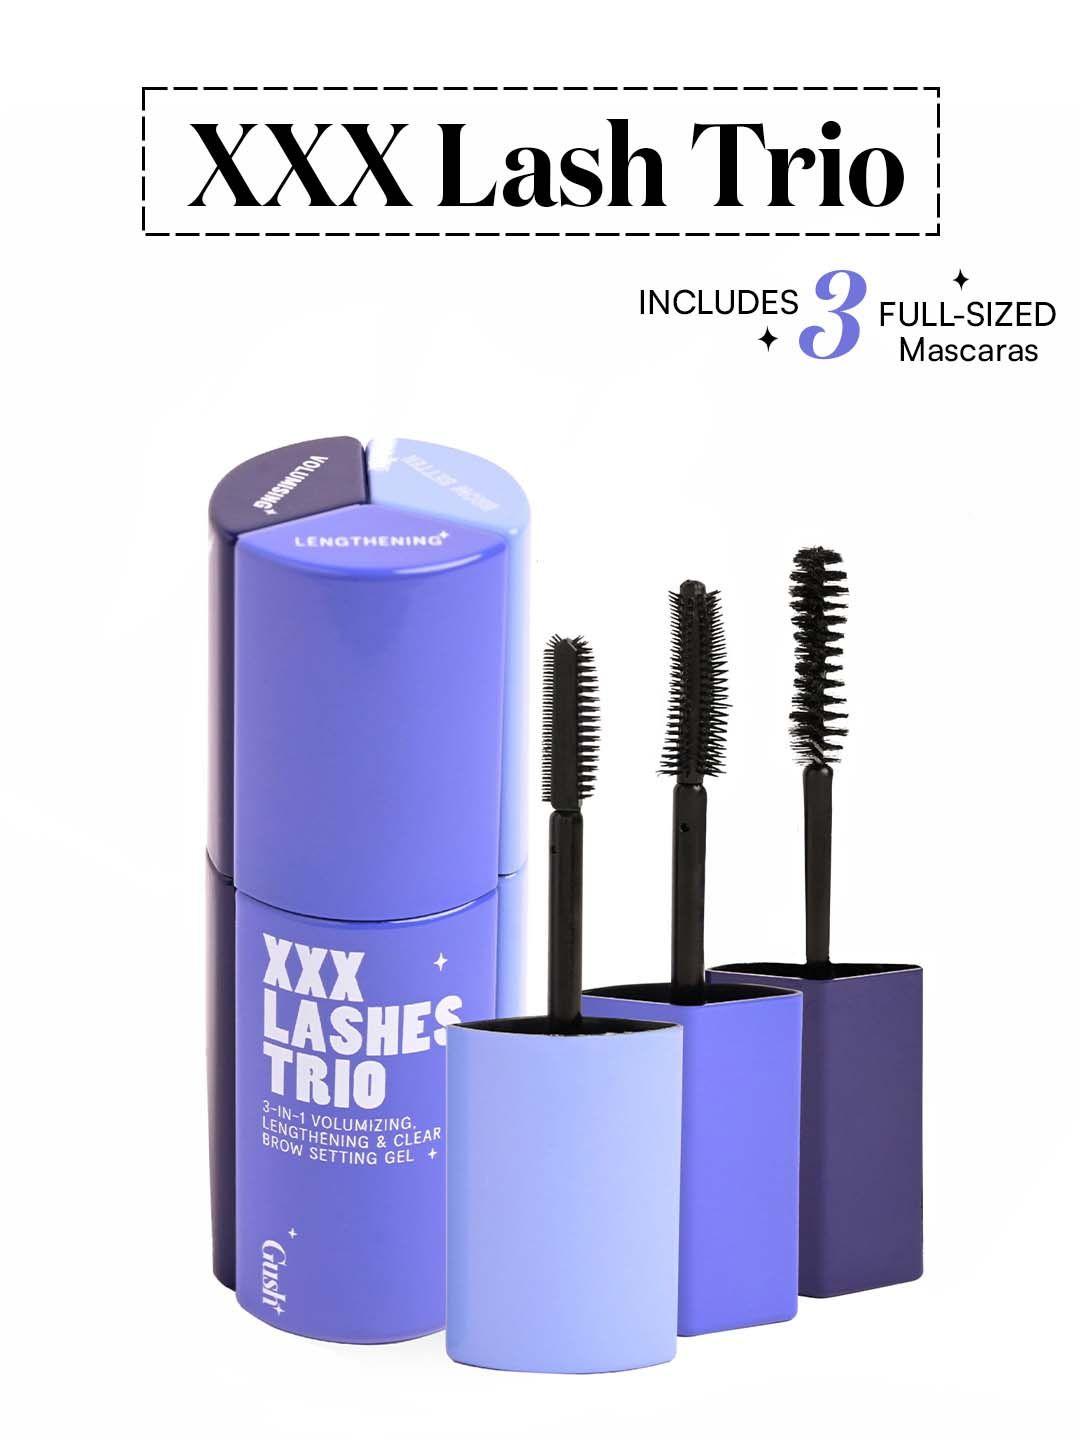 gush beauty xxx lashes trio 3-in-1 lengthening & clear brow setting gel 18g - black out